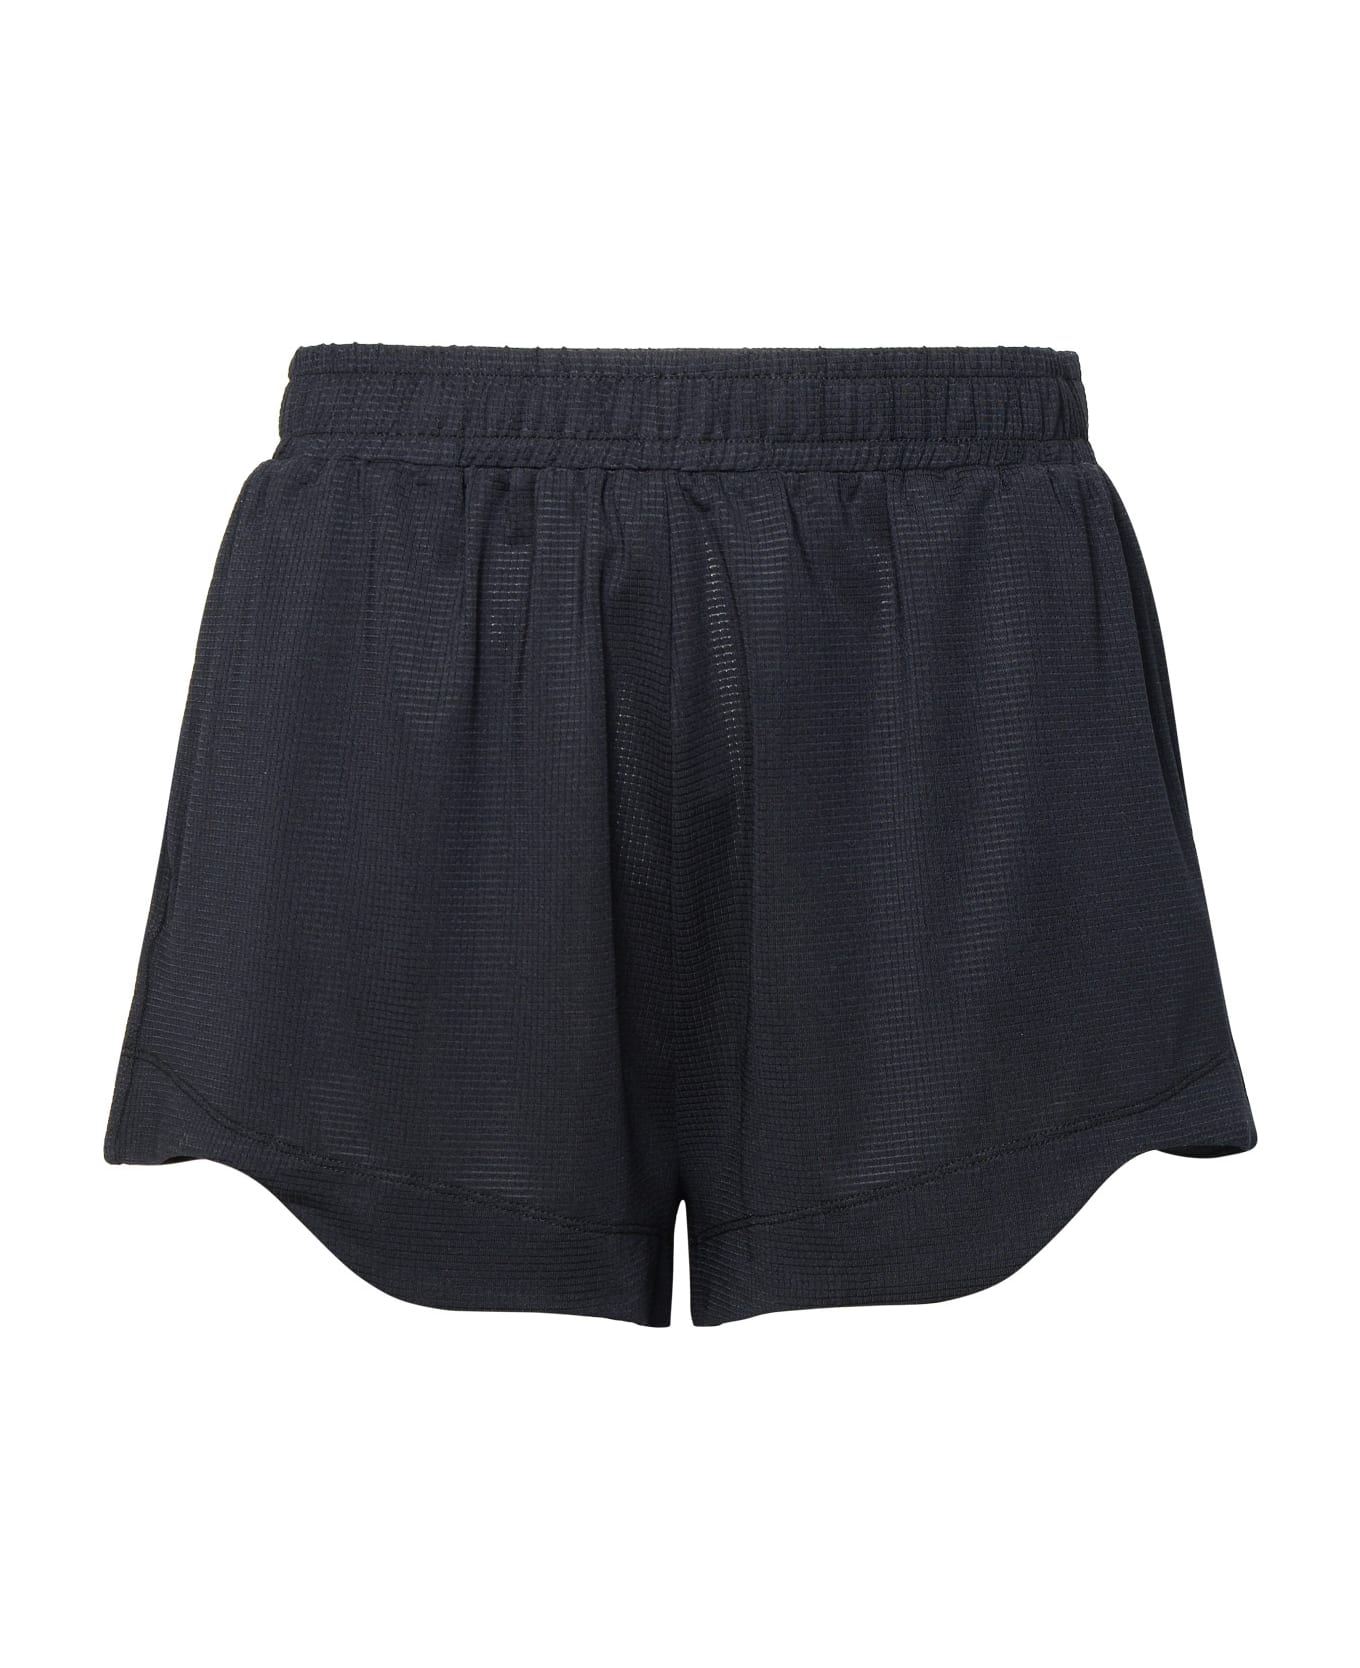 Ganni 'active' Shorts In Black Recycled Polyester Blend - Black